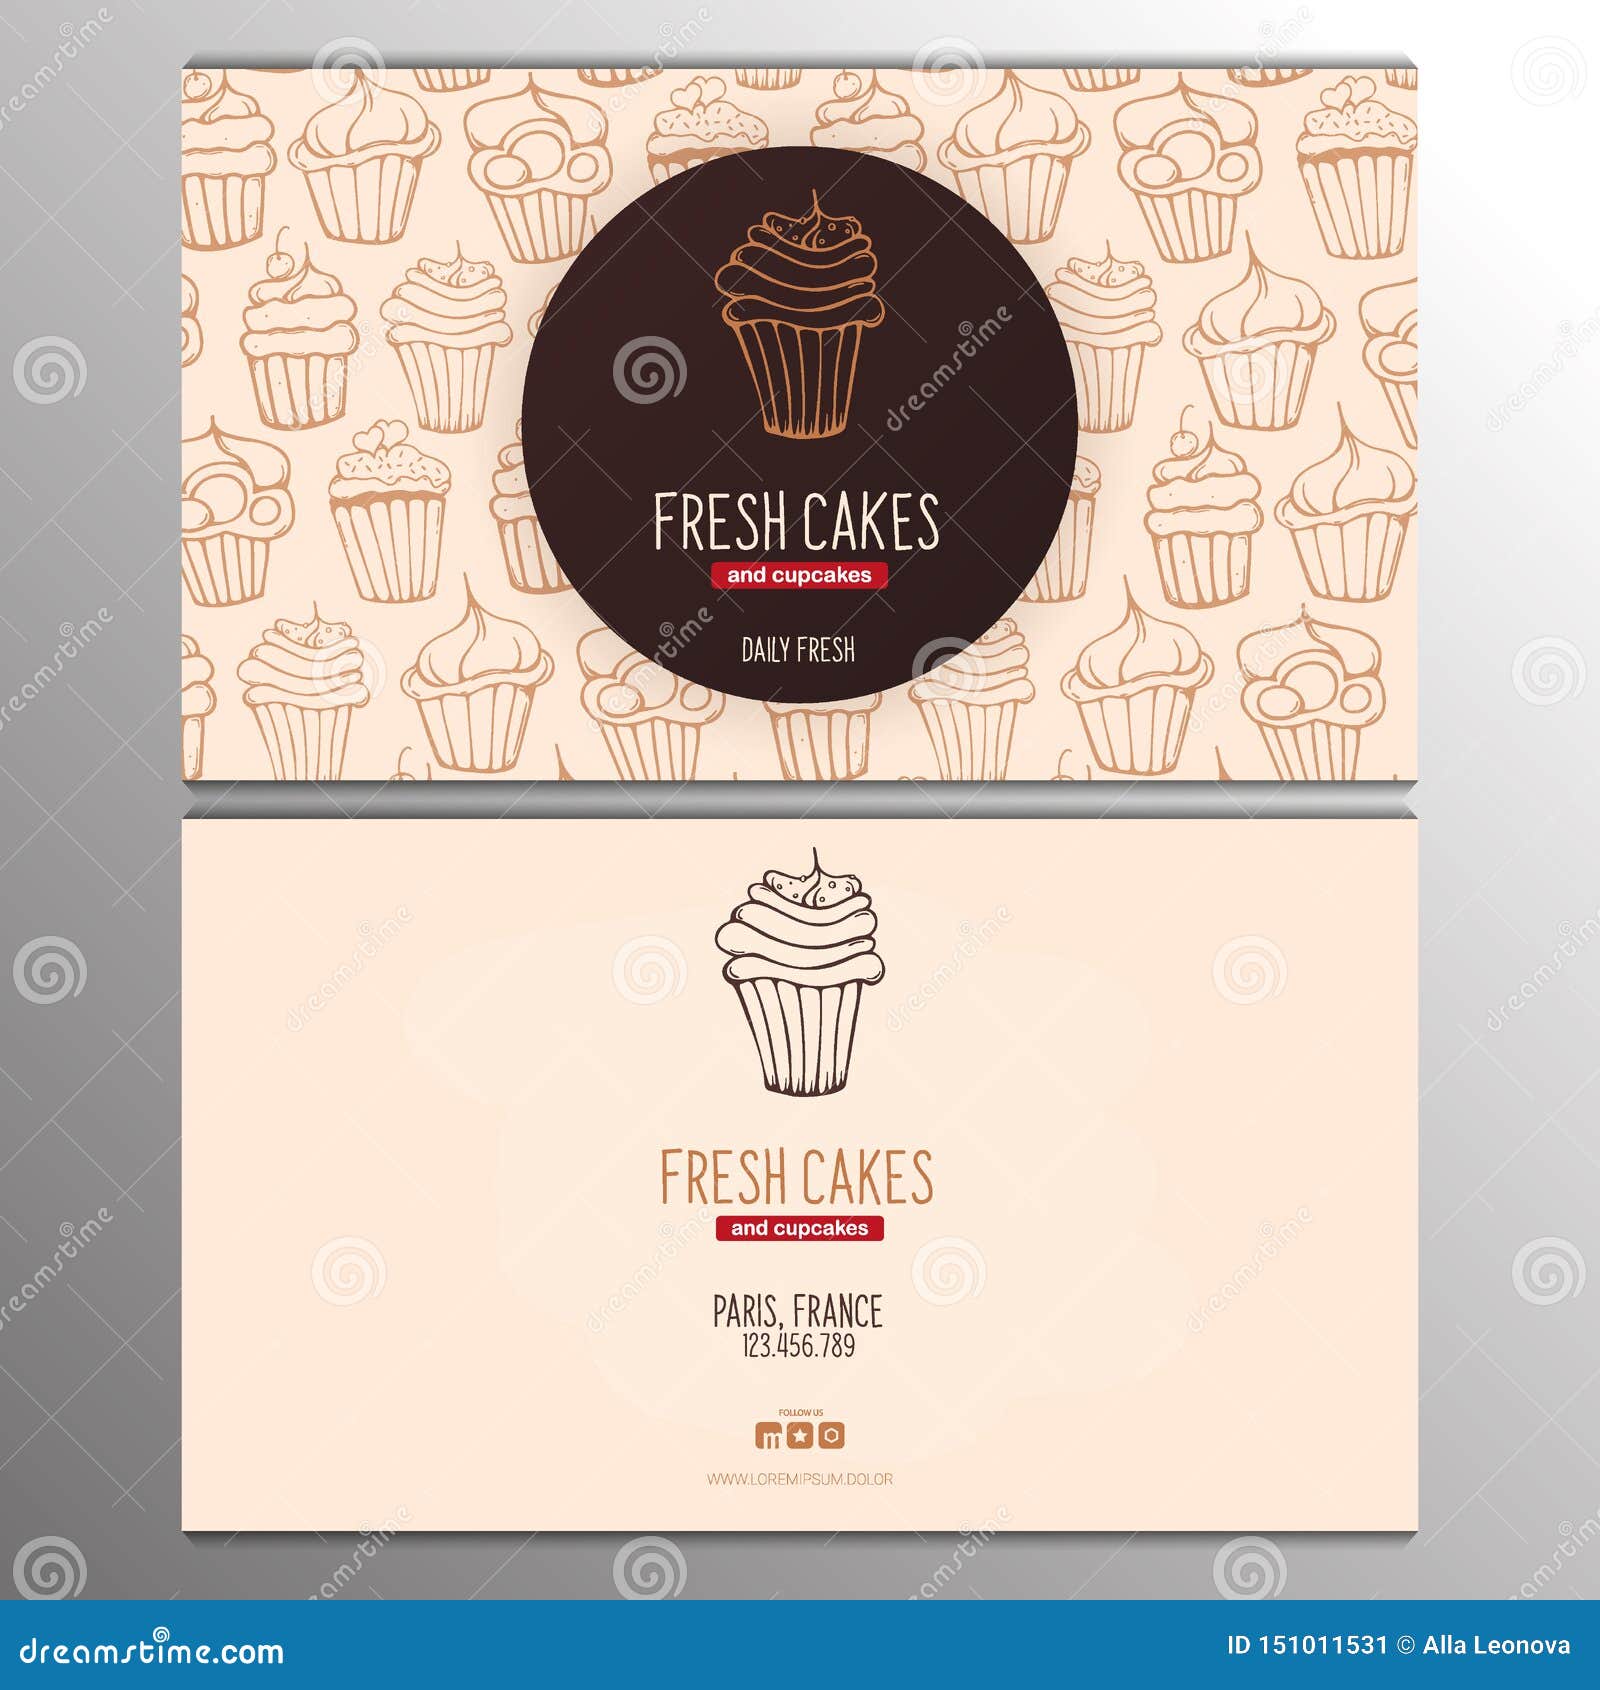 Cupcake or Cake Business Card Template for Bakery or Pastry. Stock Throughout Cake Business Cards Templates Free